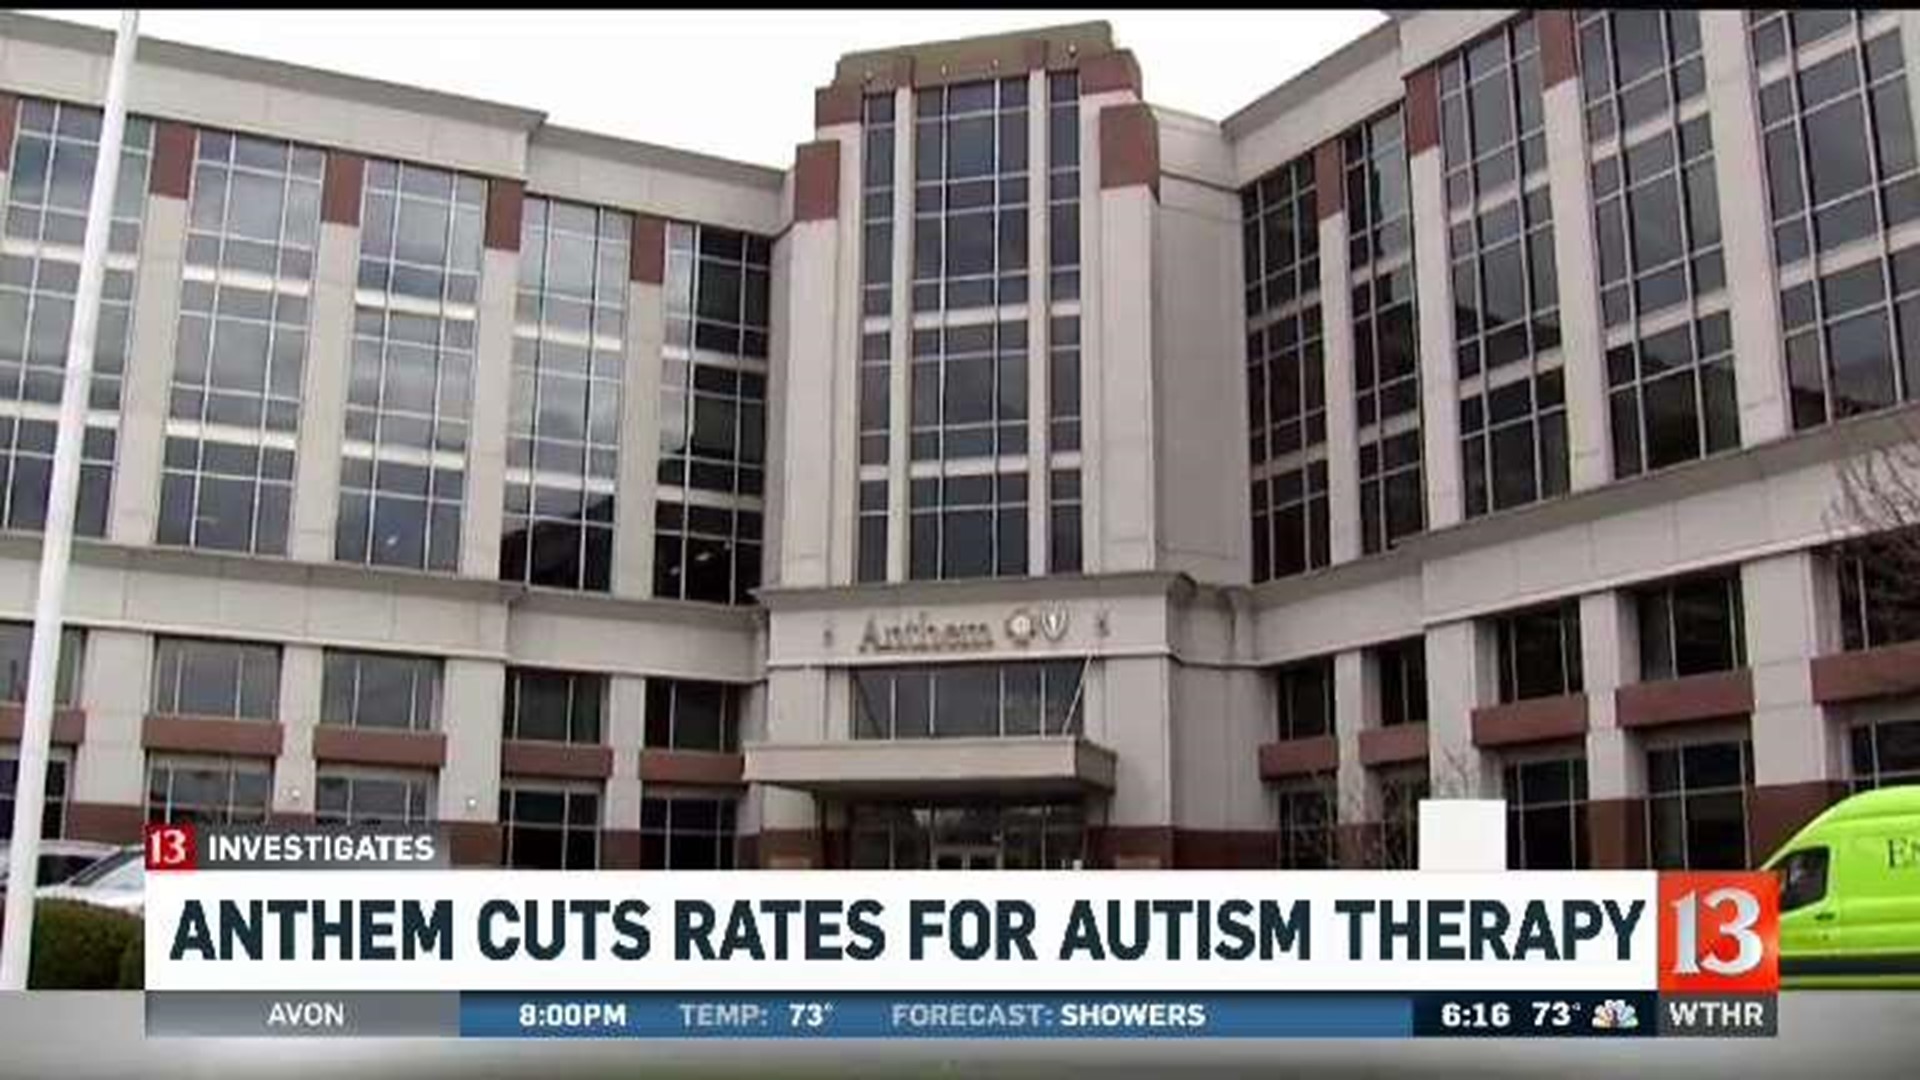 Anthem cuts rates for Autism therapy